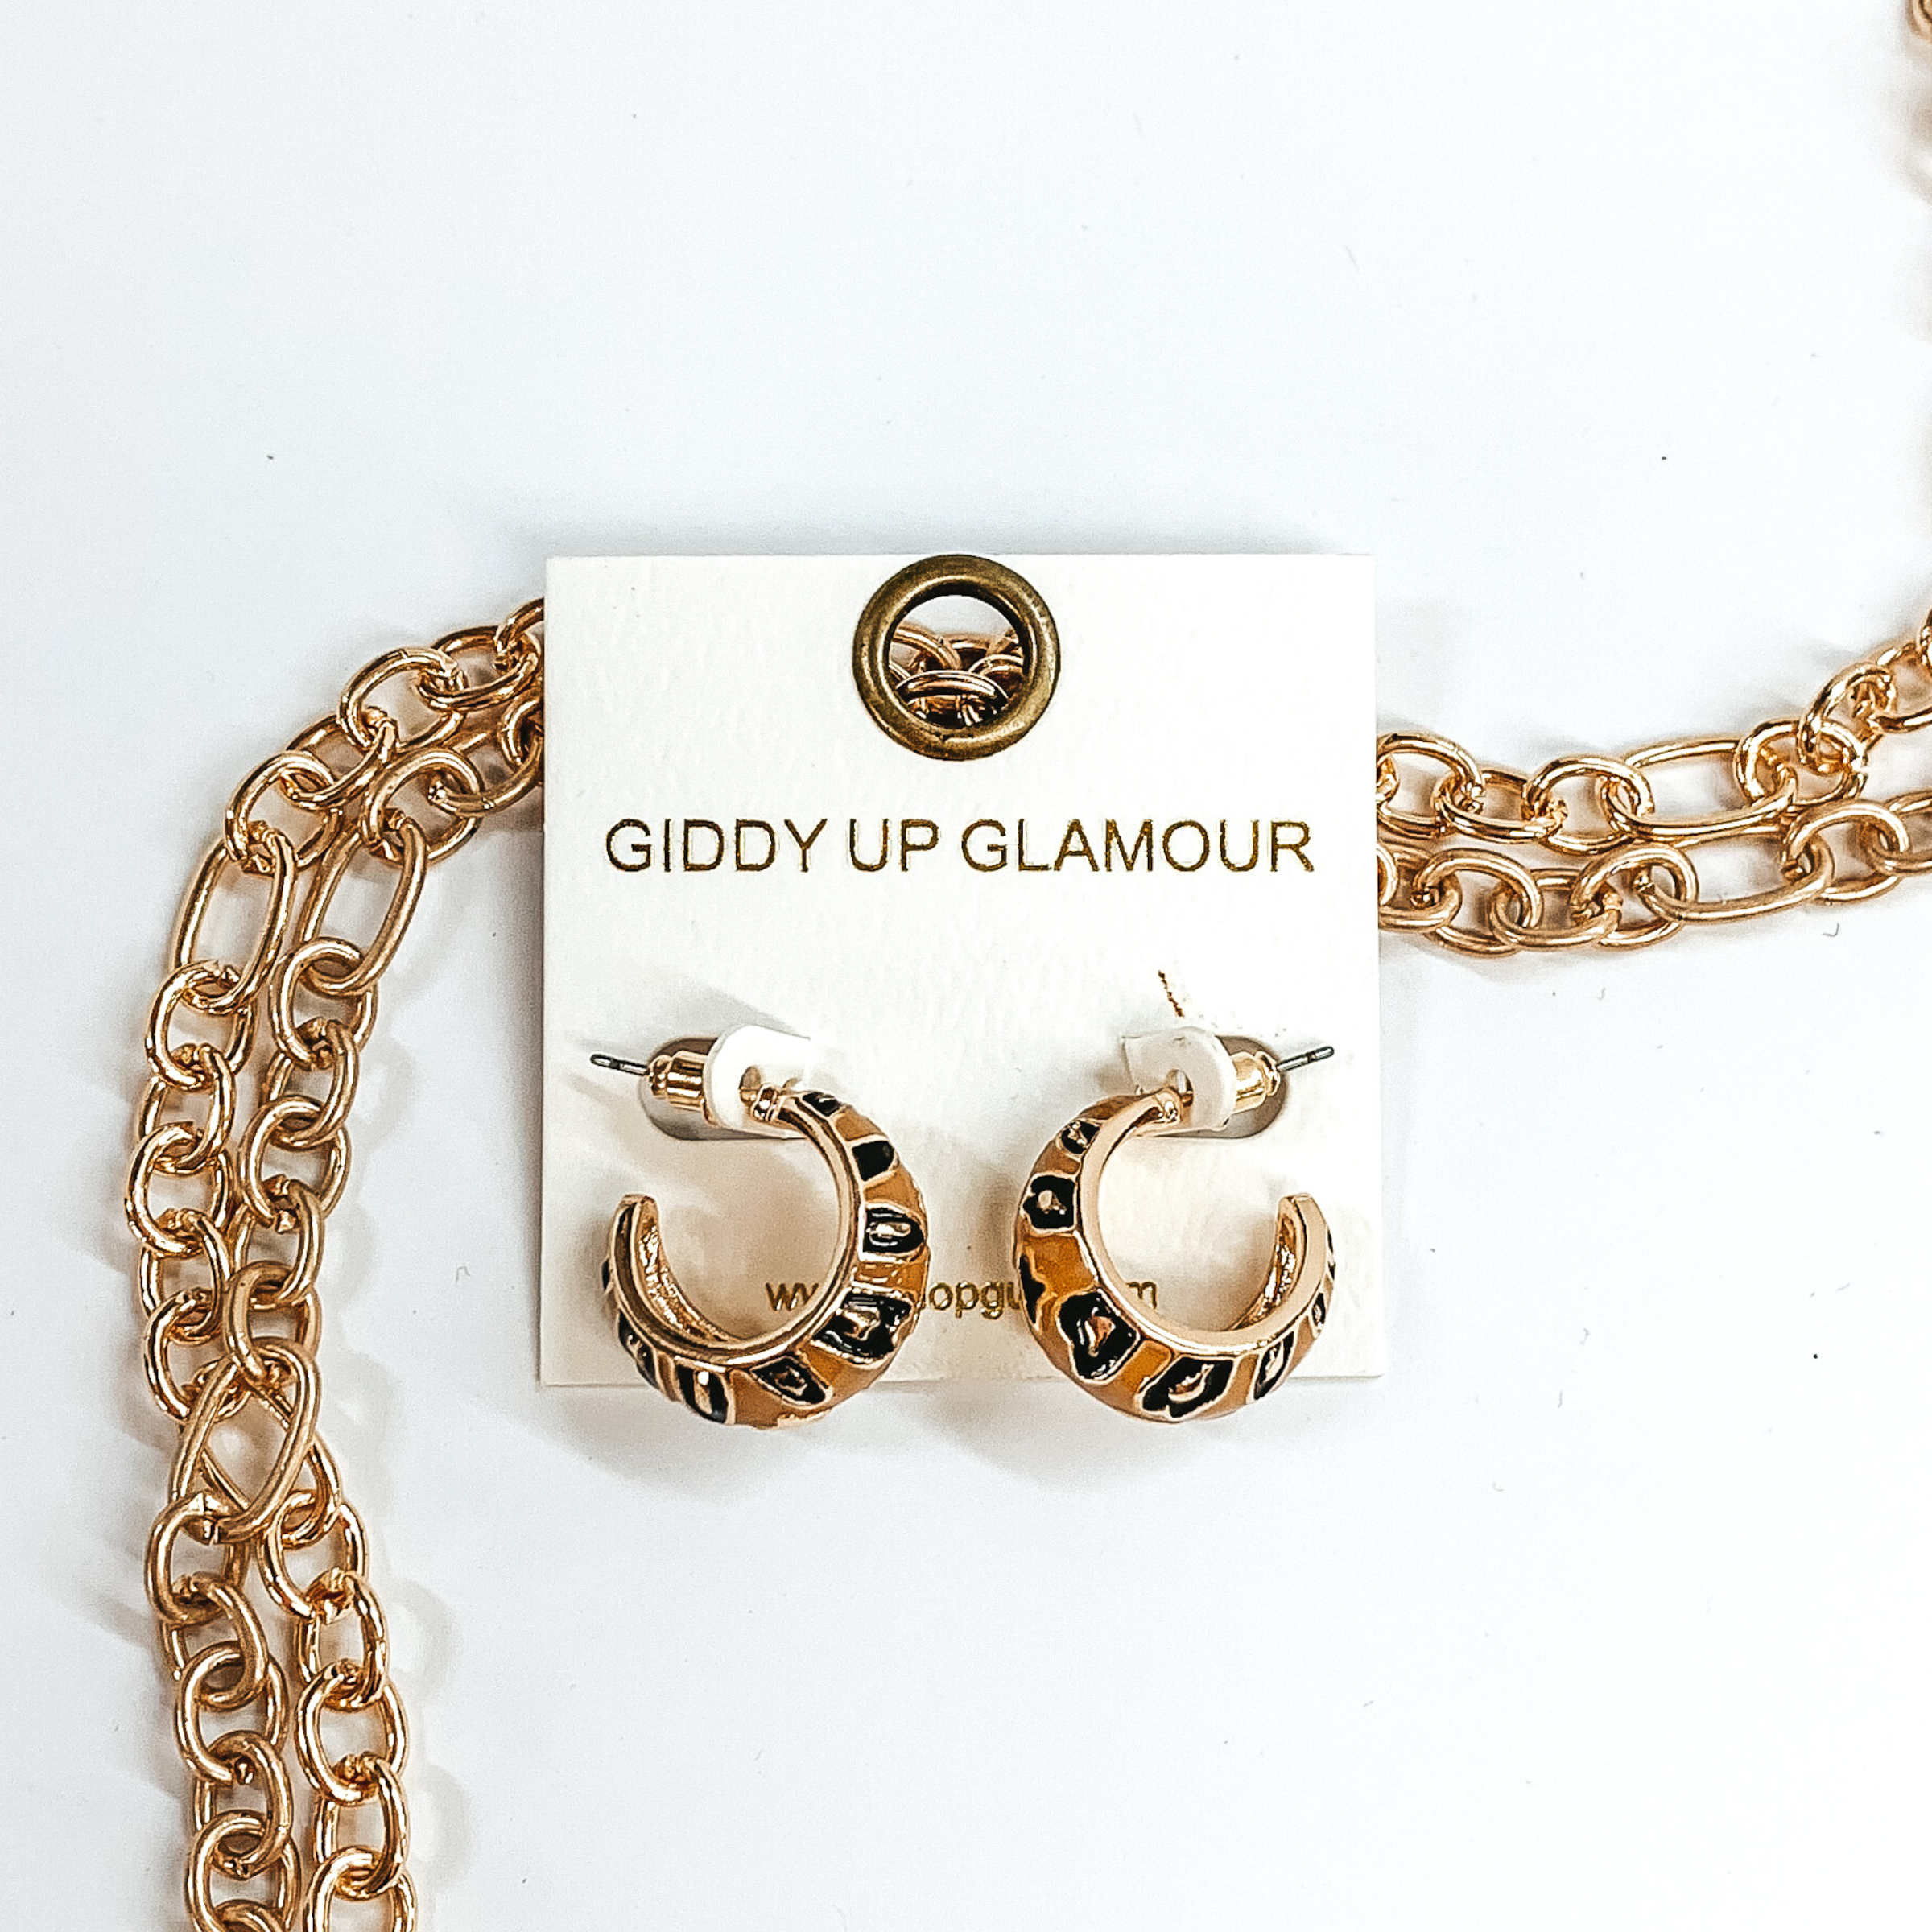 Mini, gold outline, tan hoop huggies with black and gold leopard print.These earrings are pictured on a white earrings holder, laying on top of gold chains on a white background.